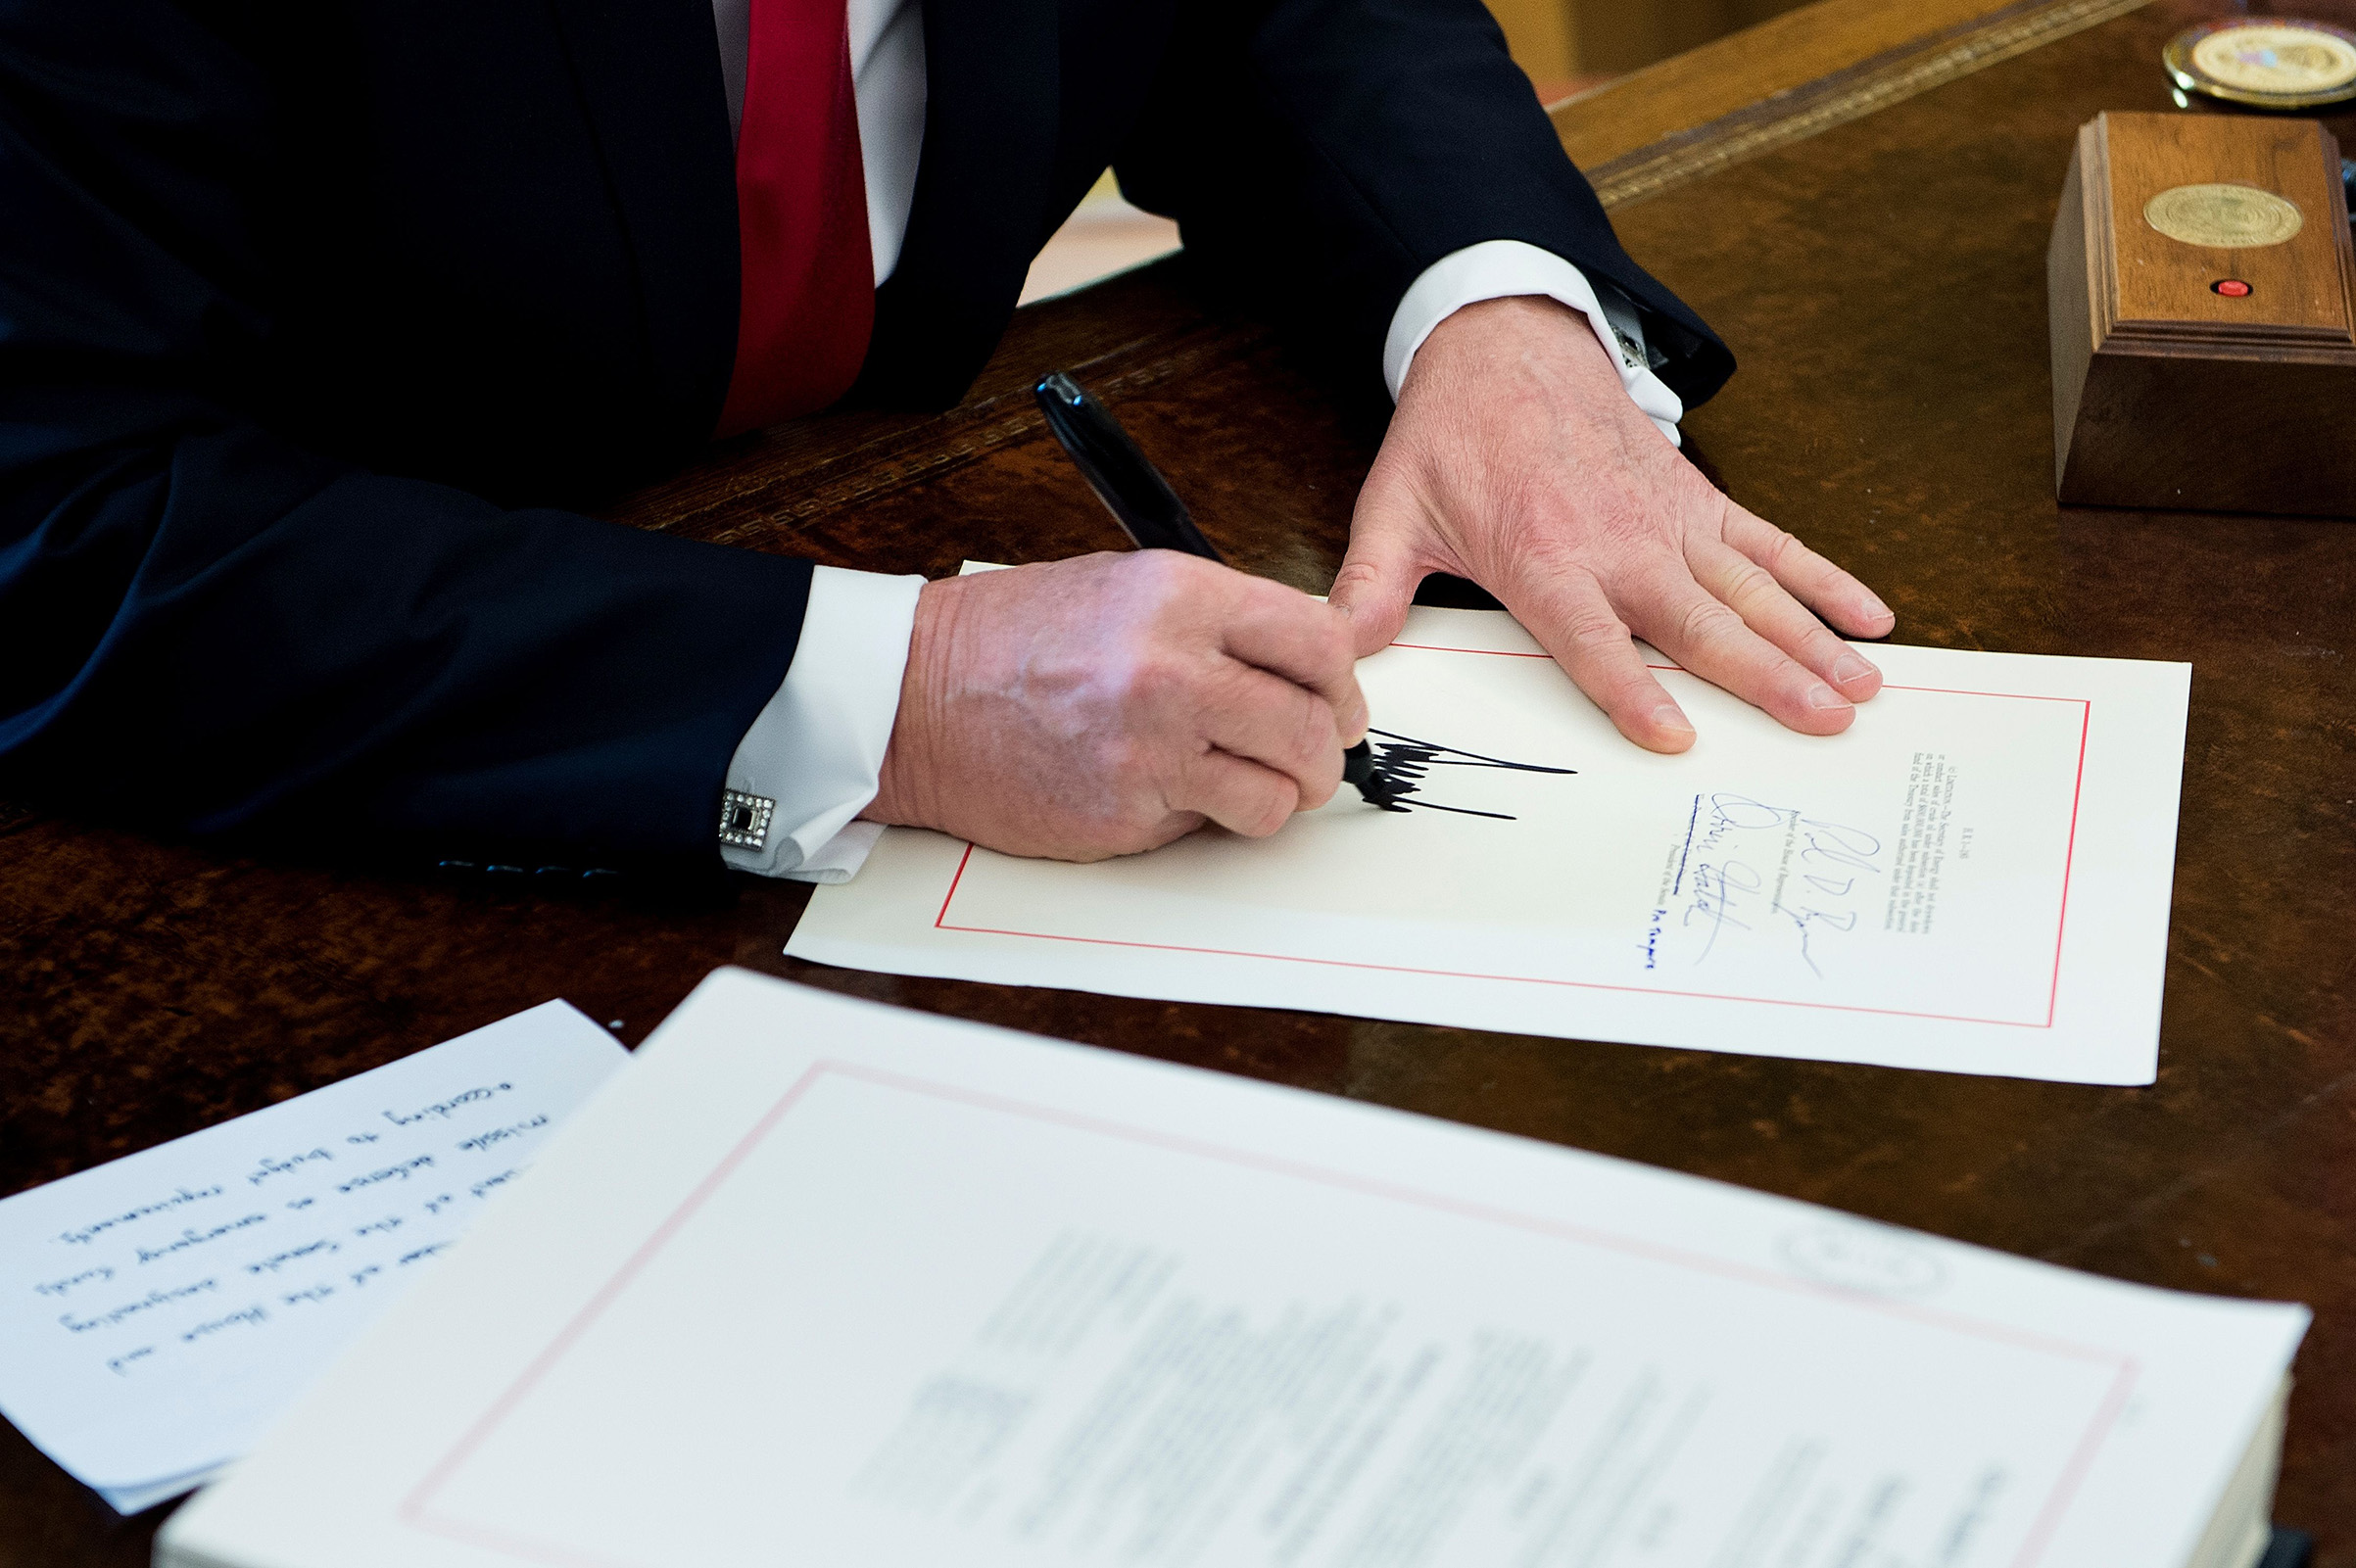 President Donald Trump signs the Tax Cut and Reform Bill in the Oval Office at The White House on Dec. 22, 2017. (Brendan Smialowski—AFP/Getty Images)